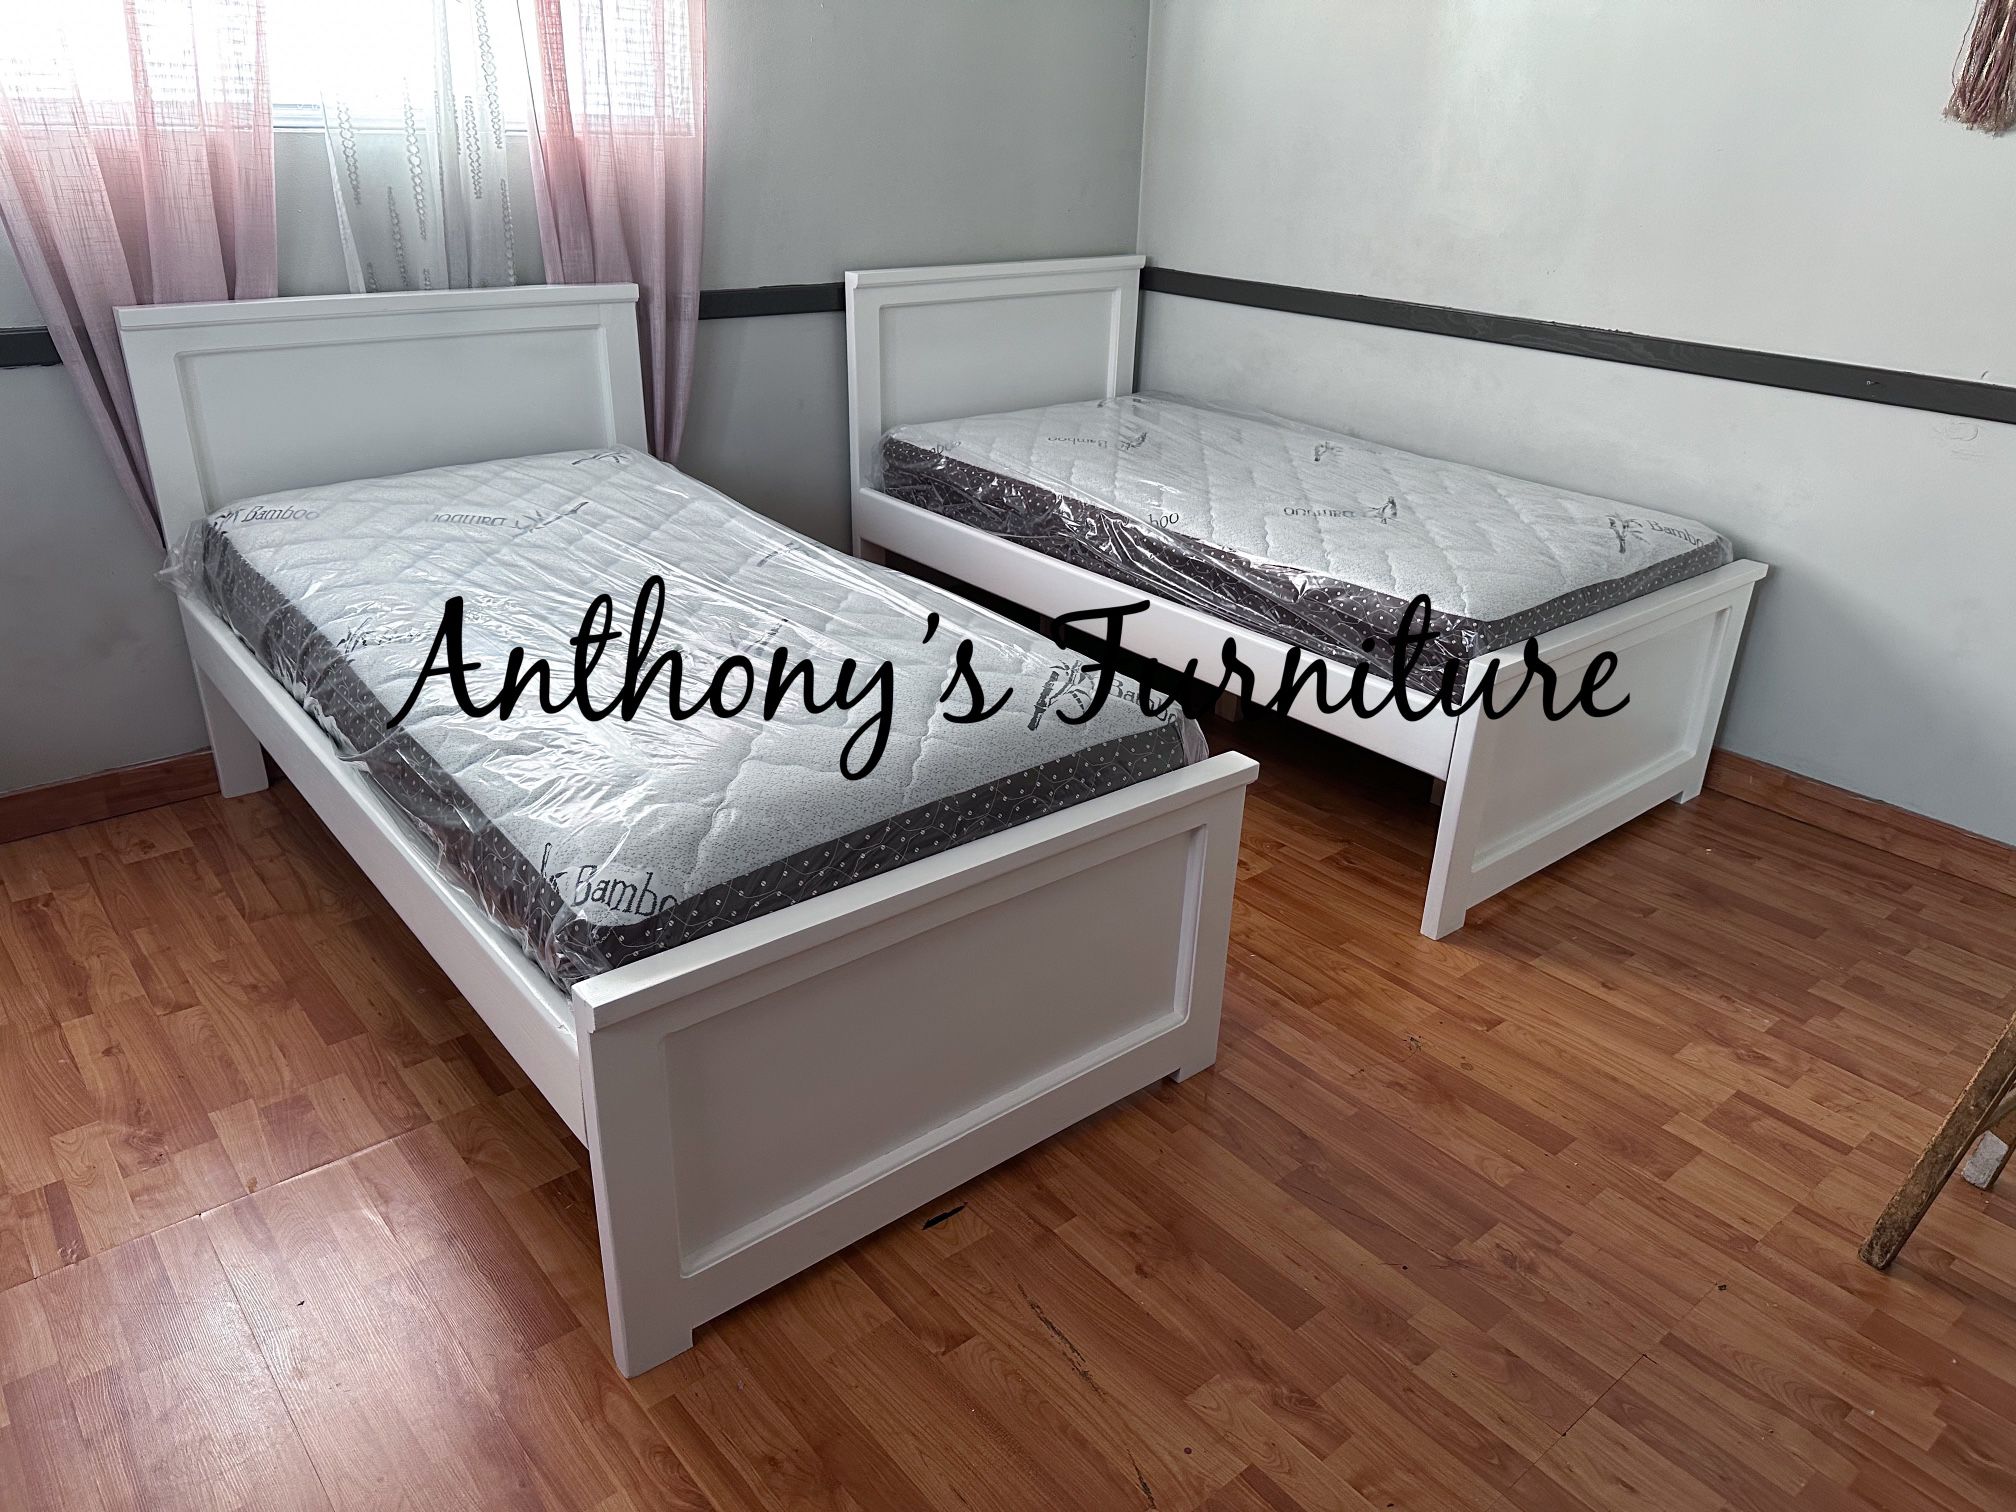 2 White Twin Bed & Bamboo Mattresses 